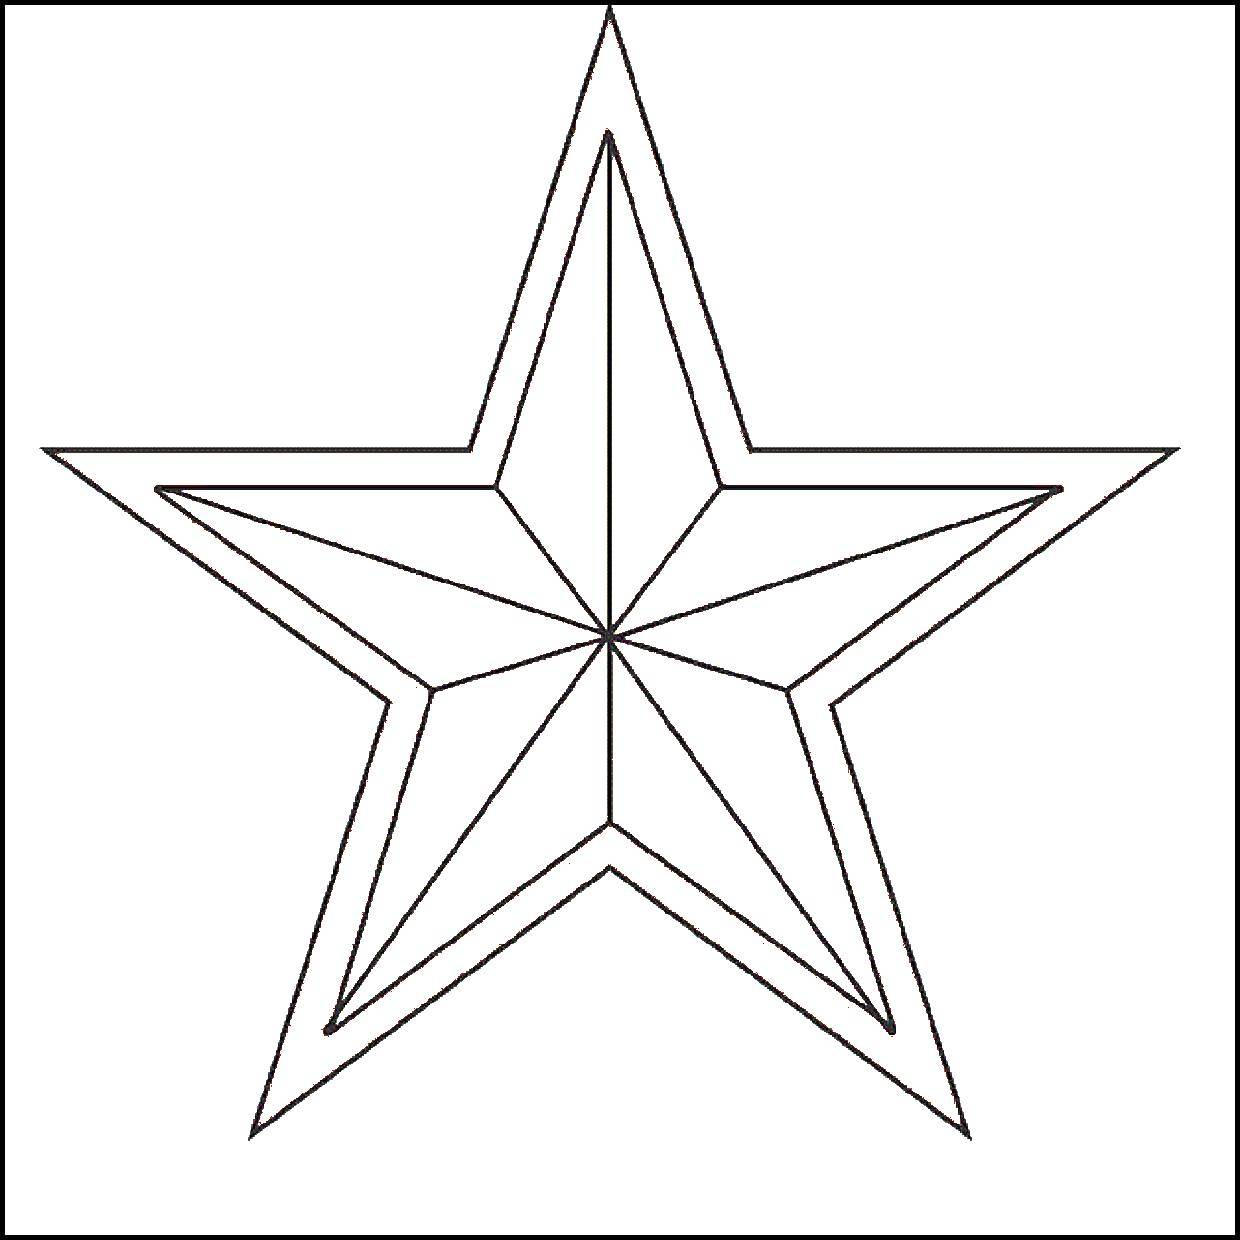 Coloring Red star. Category Soviet coloring. Tags:  Soviet signs, military, star, USSR.